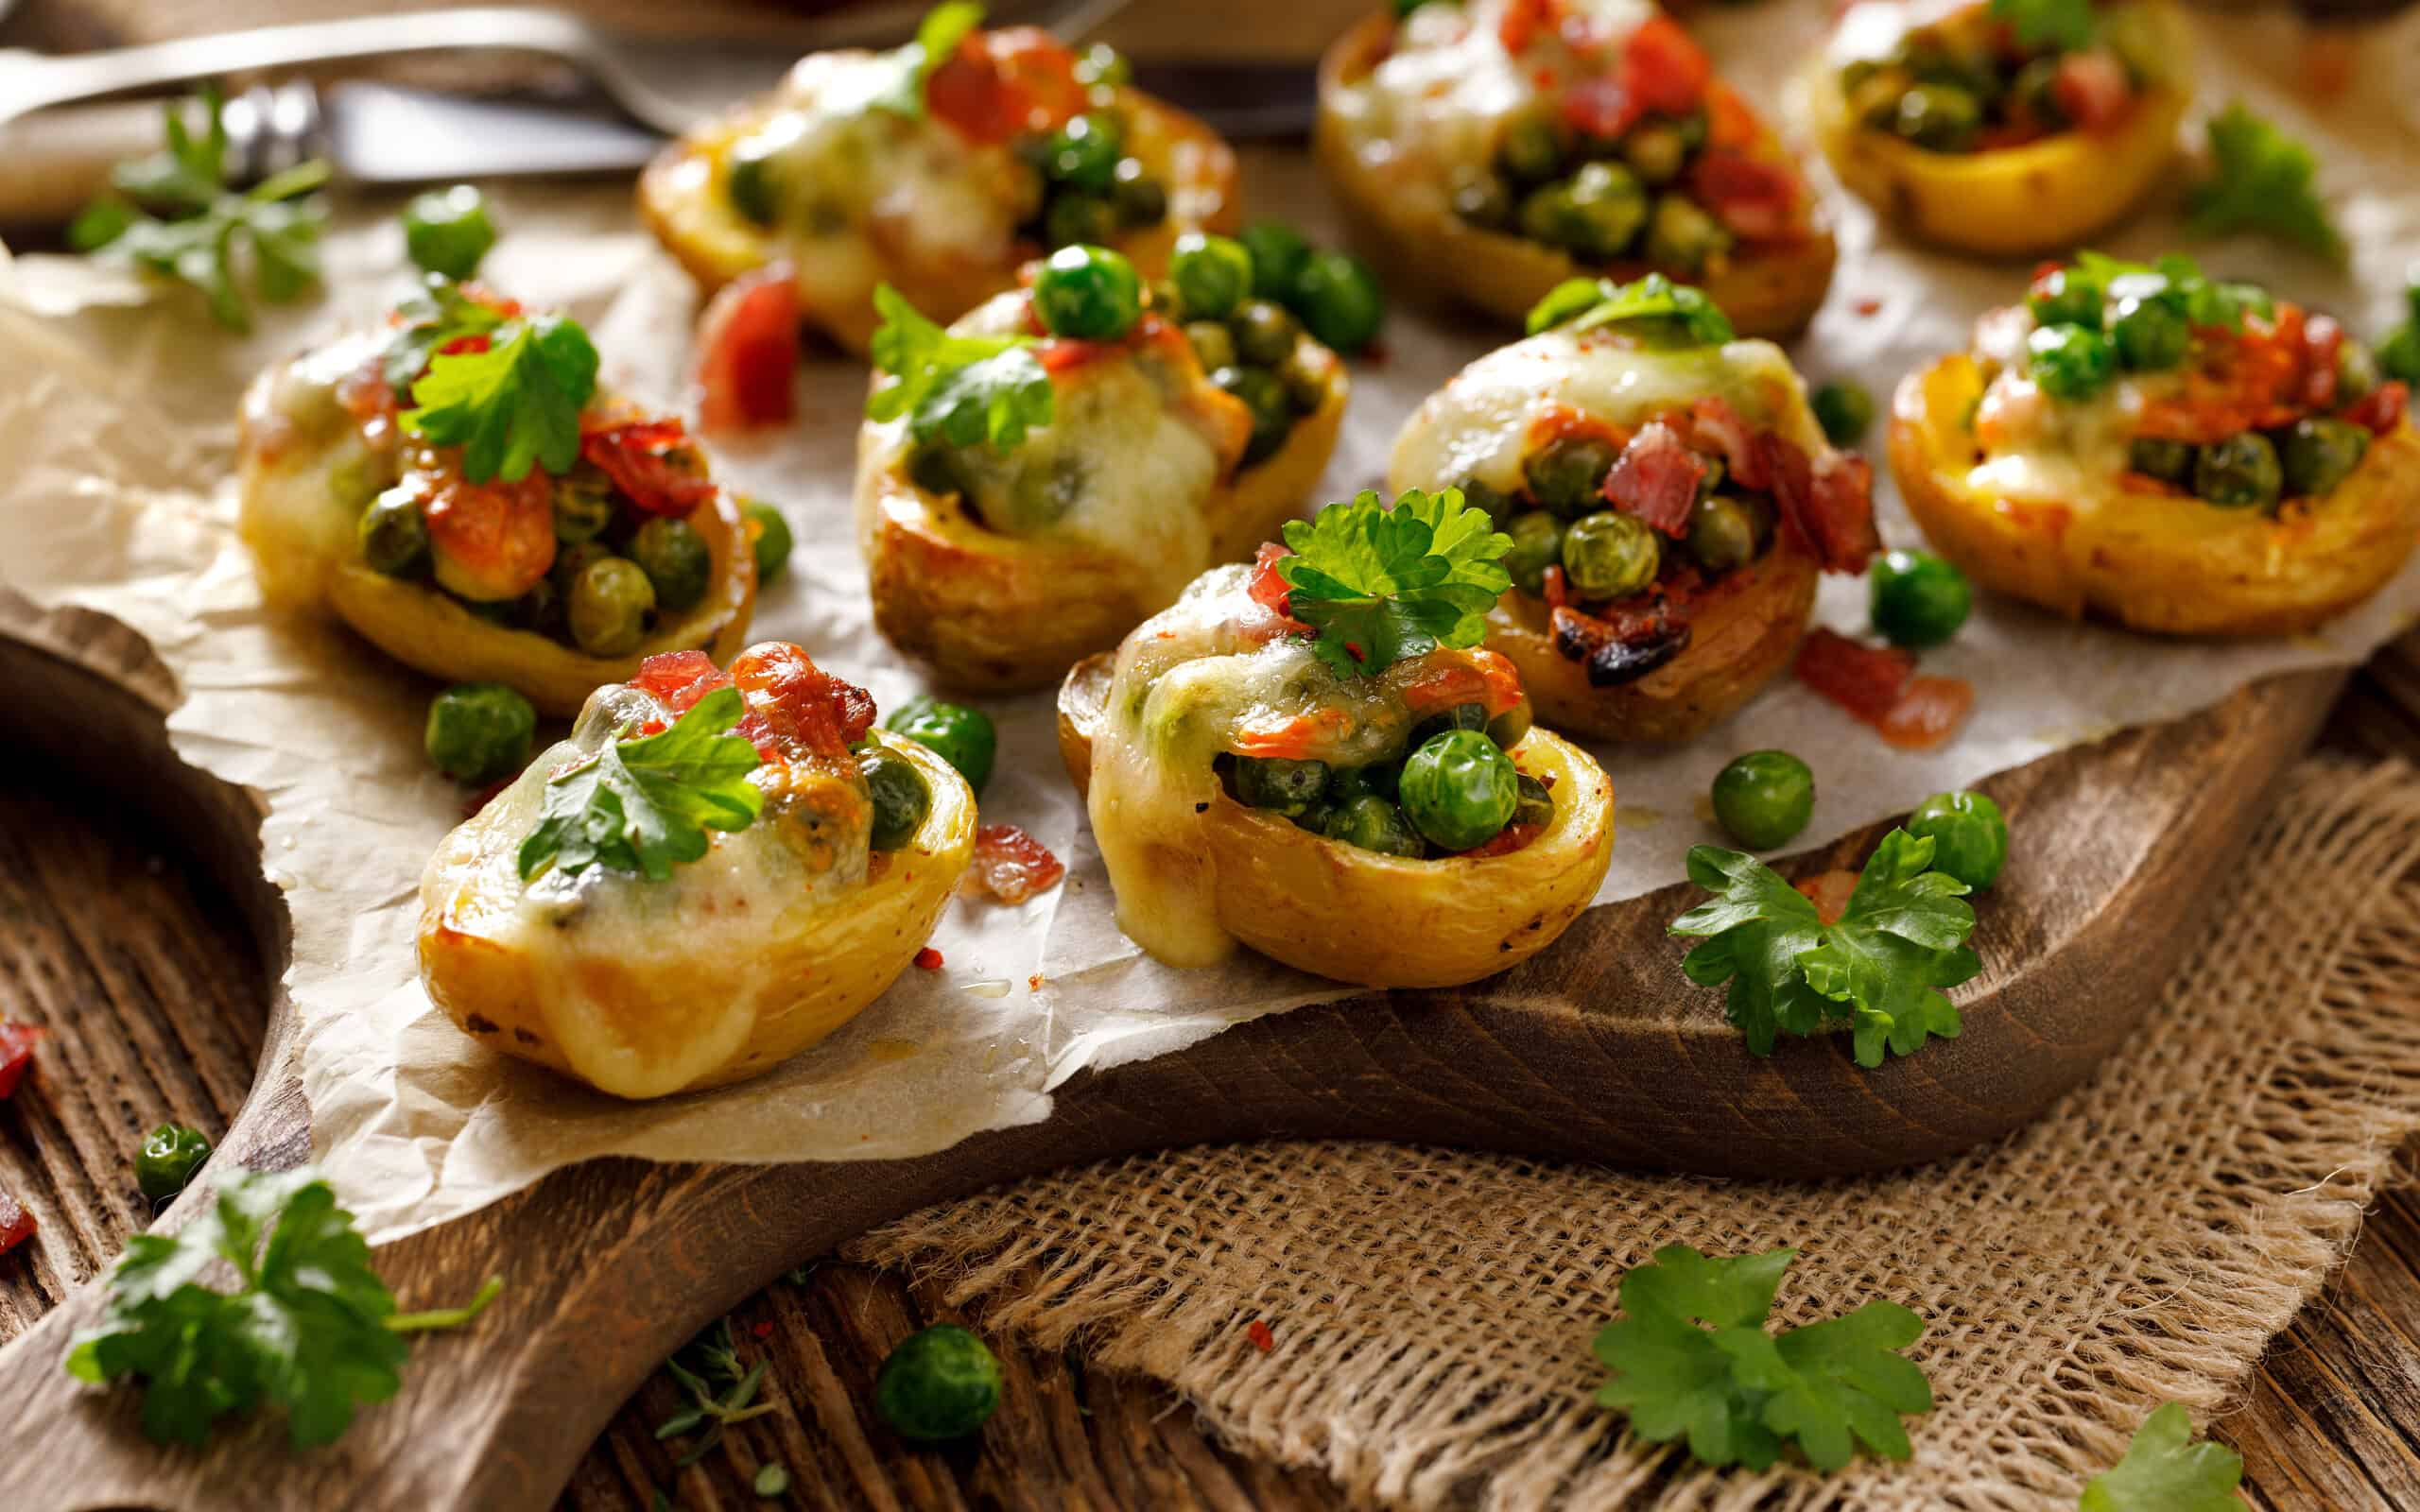 Baked potatoes stuffed with green peas, cheese and bacon